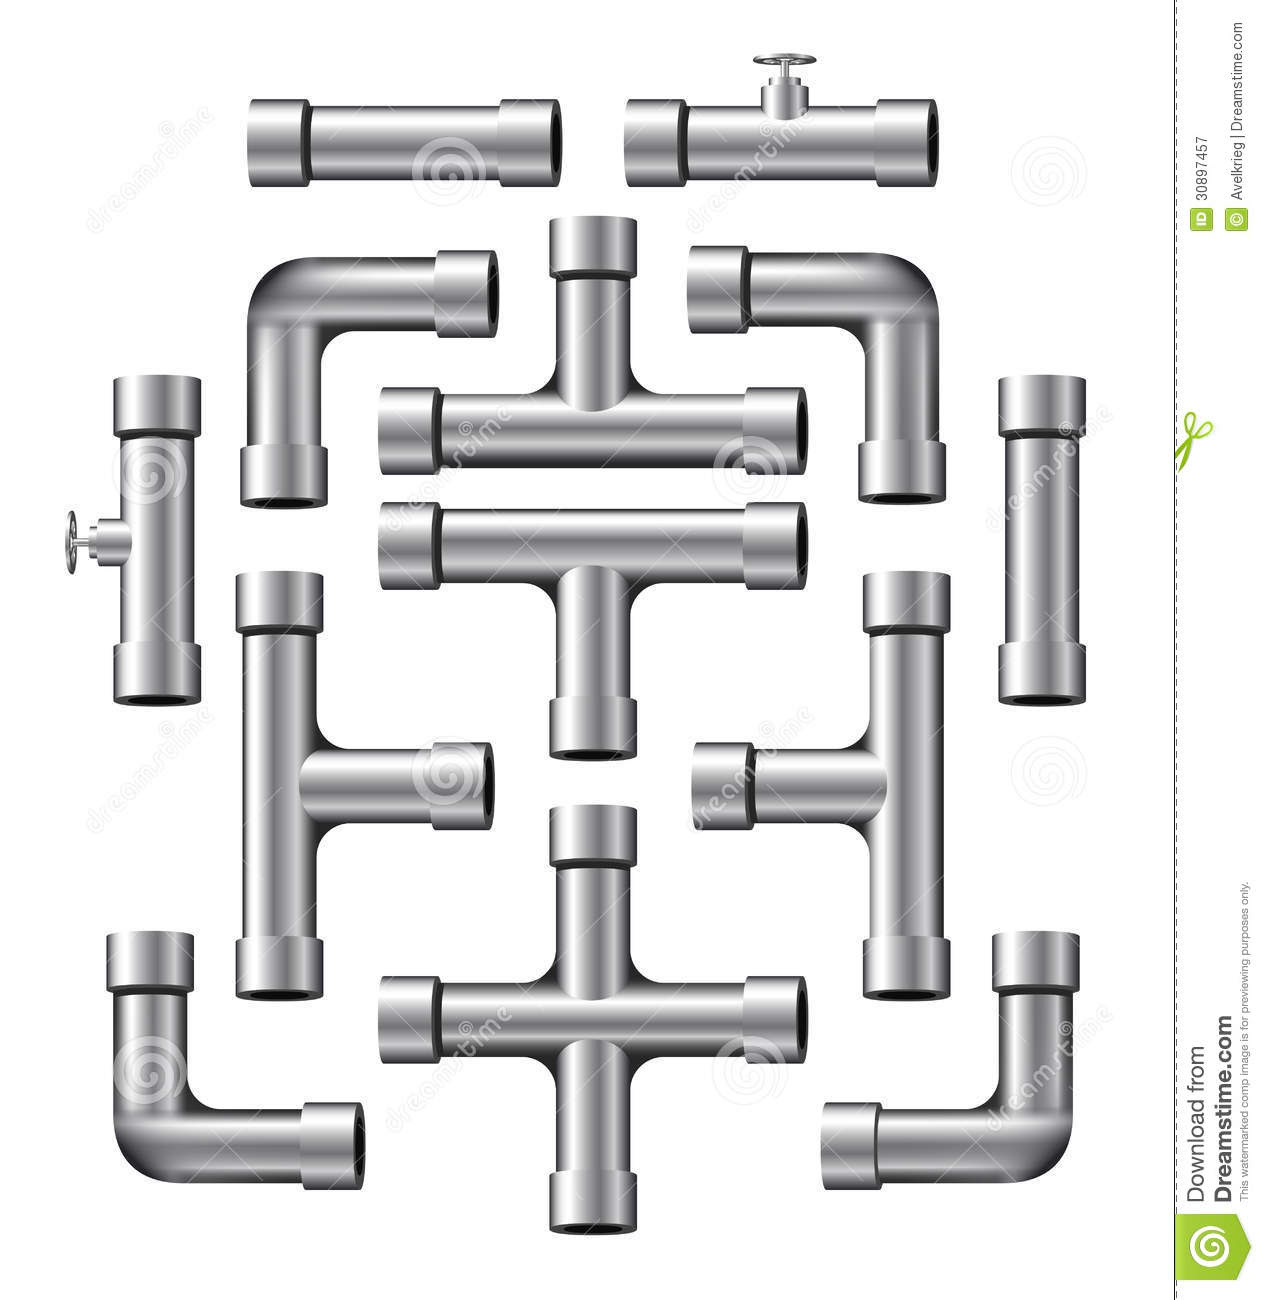 Pipes clipart - Clipground